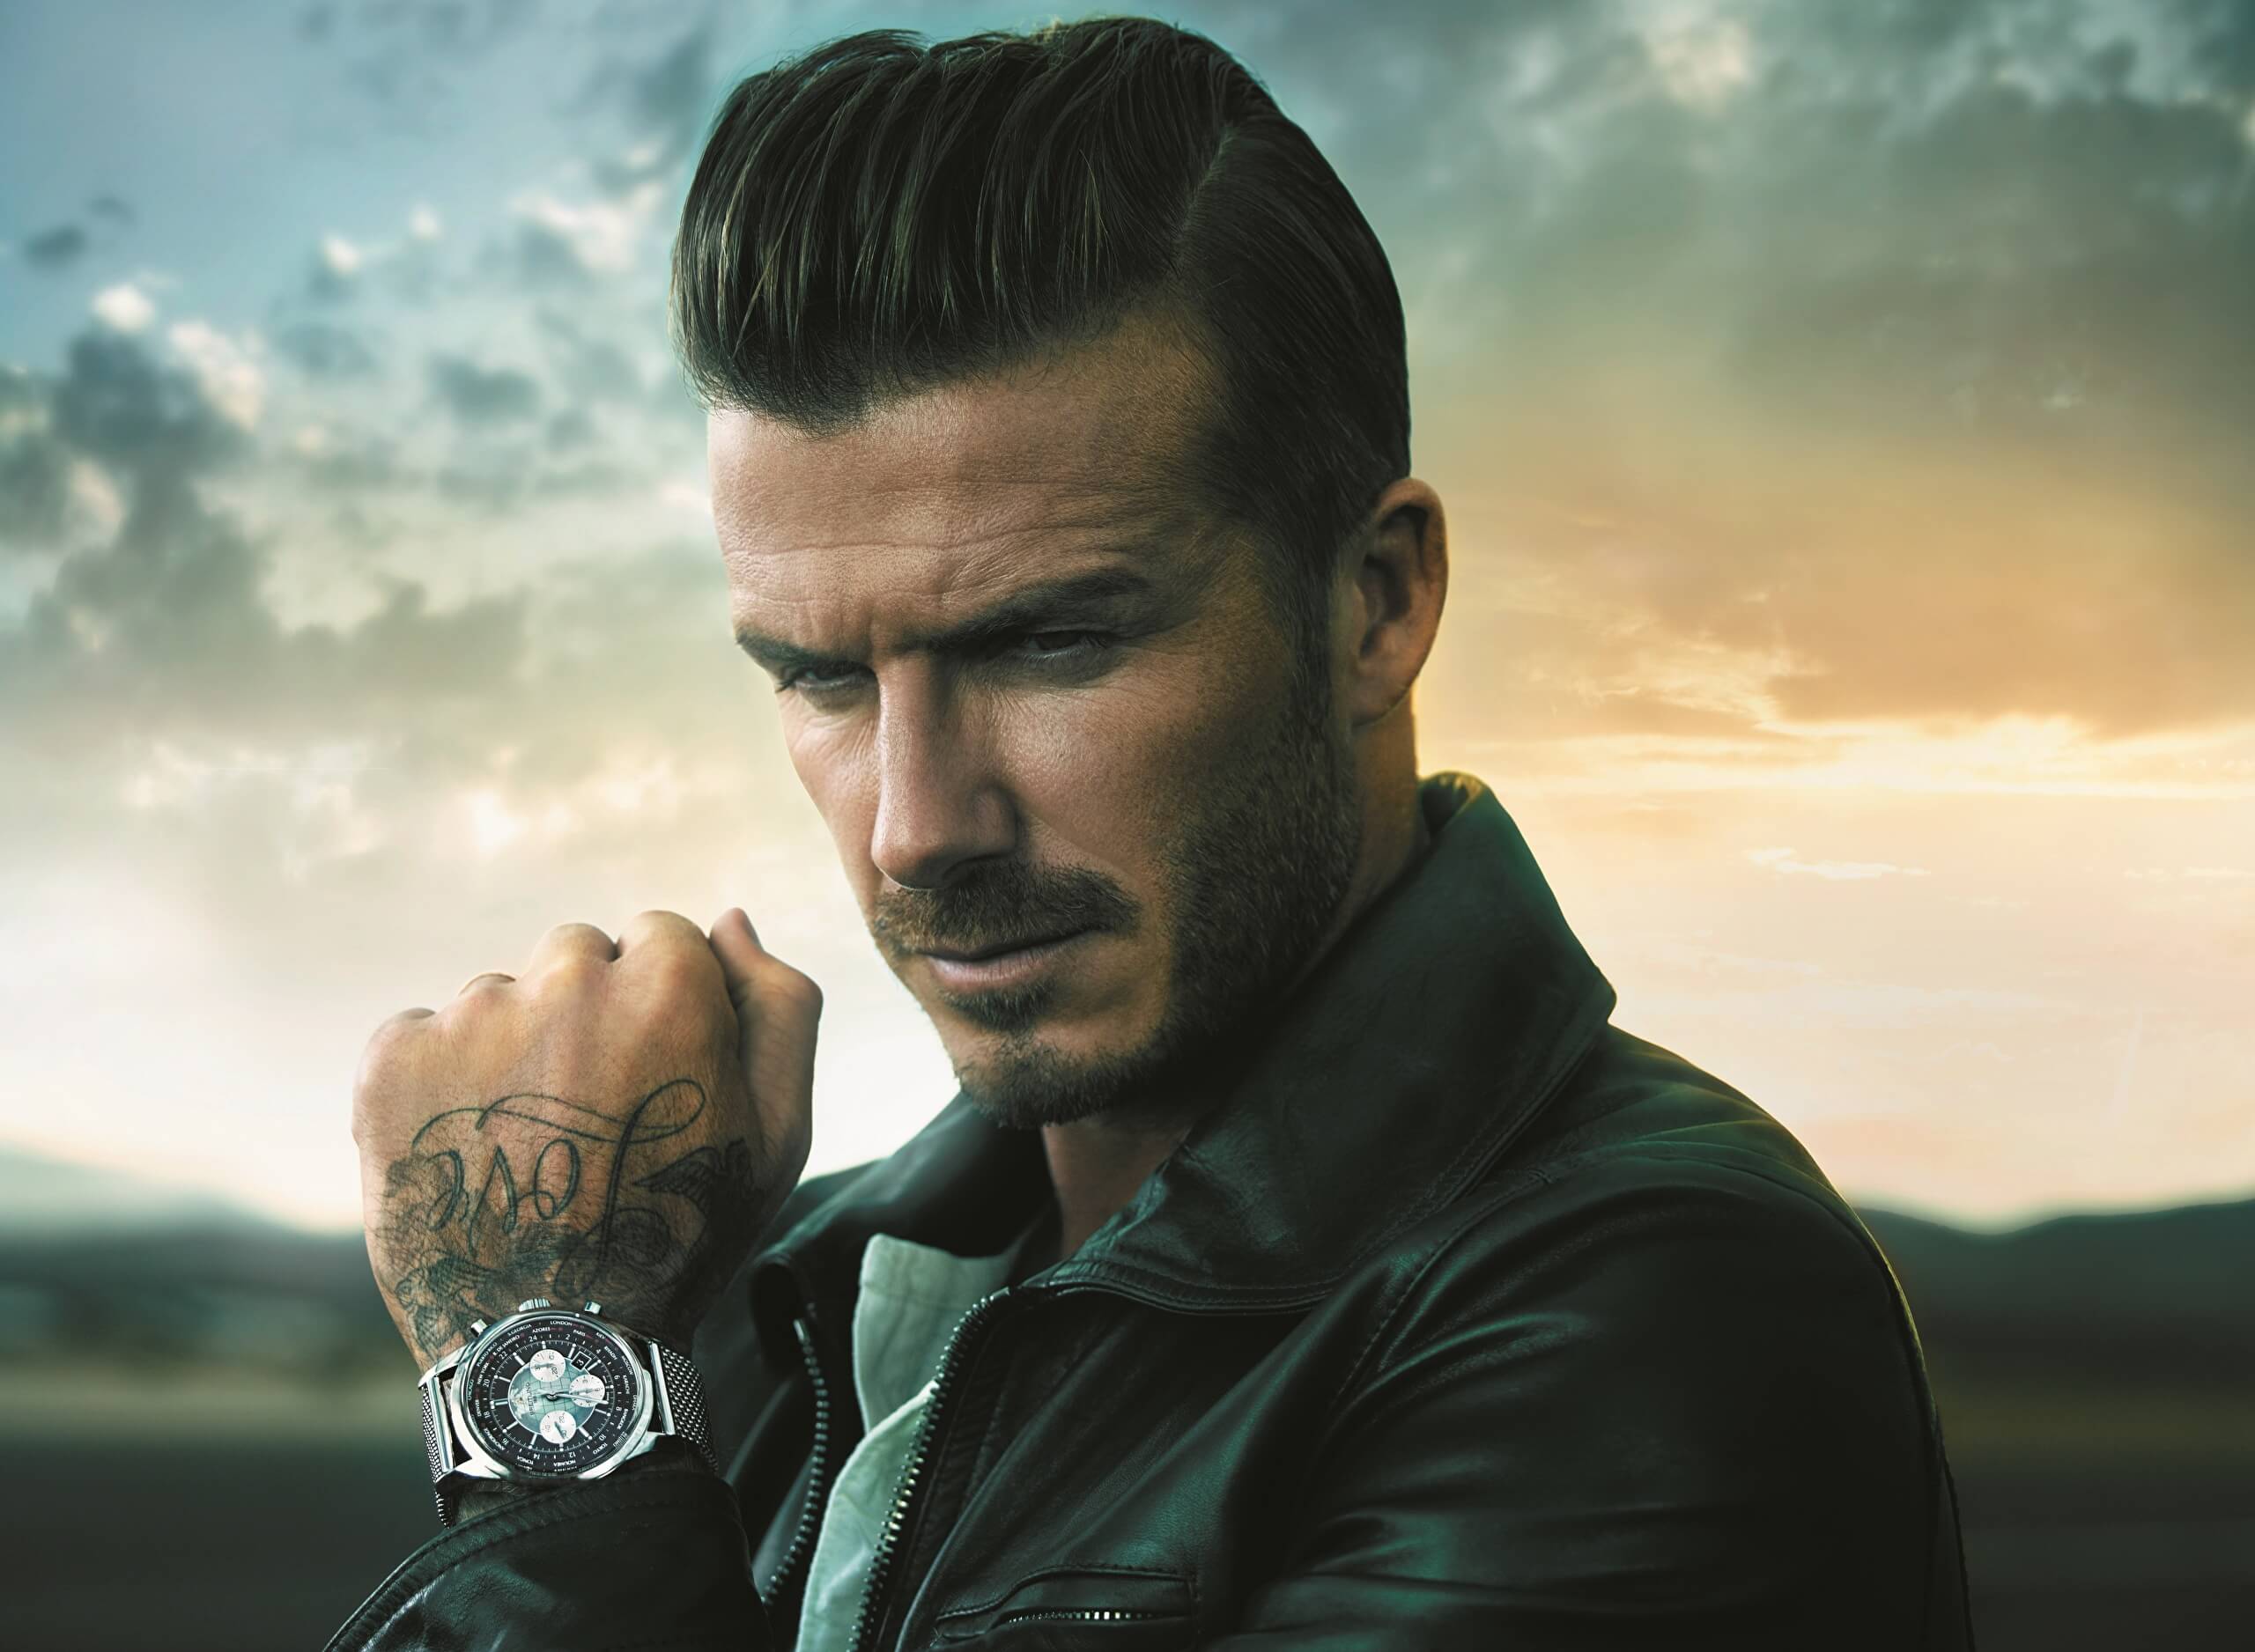 David Beckham Beck’s Comb-Over Hairstyle